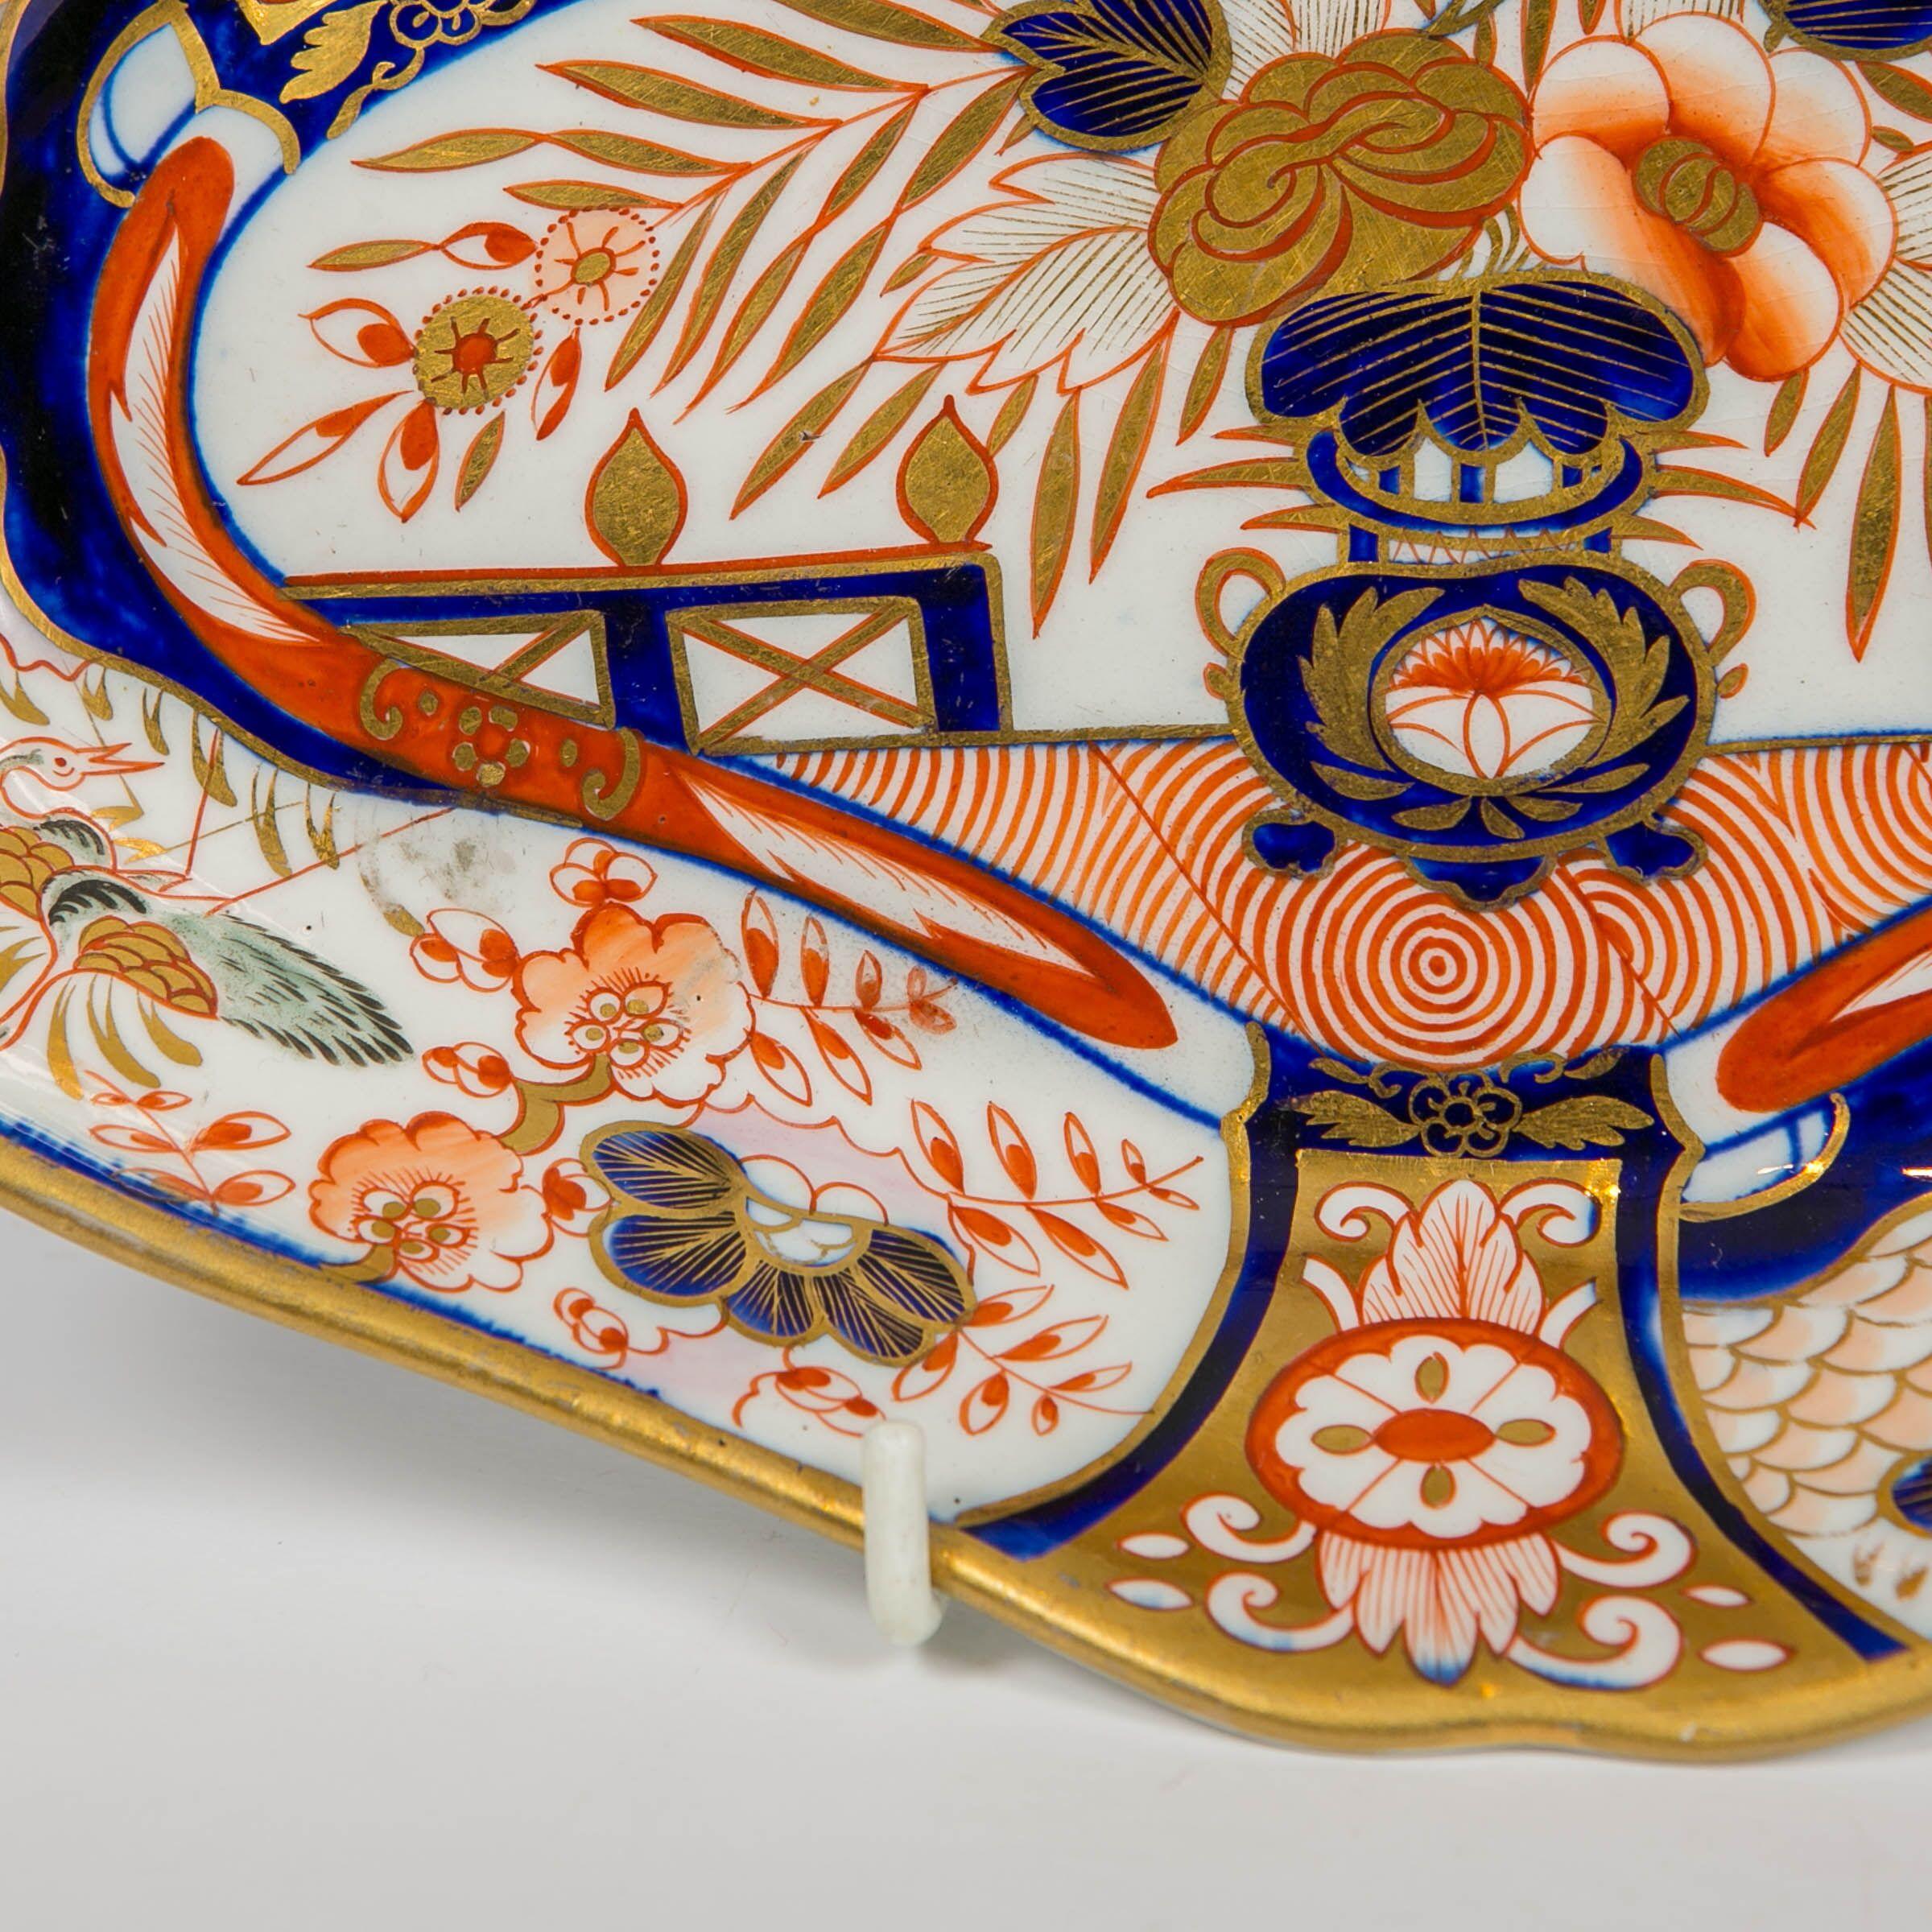 English Coalport Admiral Nelson Pattern Oval Dishes, England, circa 1810